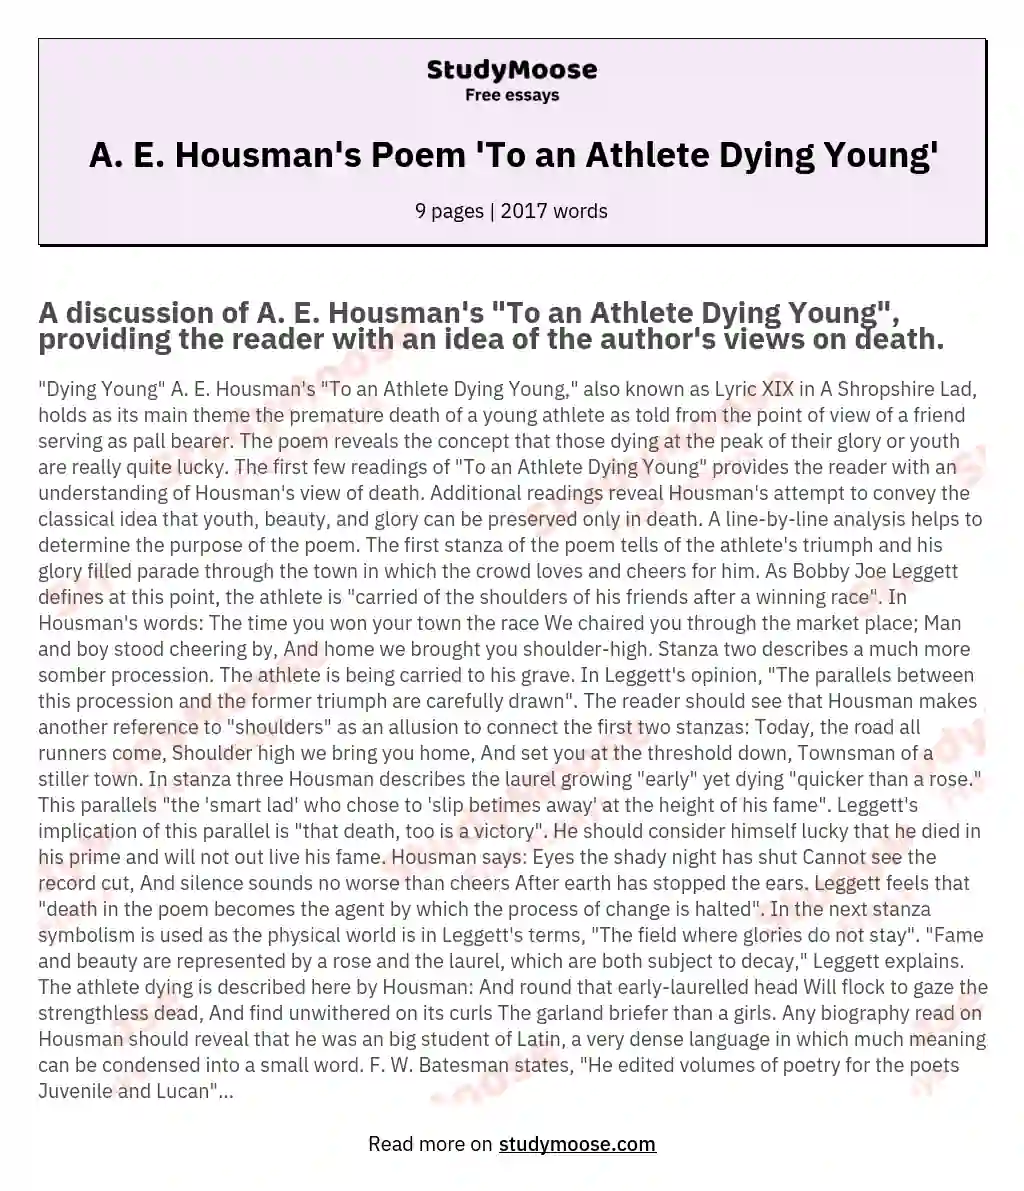 A. E. Housman's Poem 'To an Athlete Dying Young'